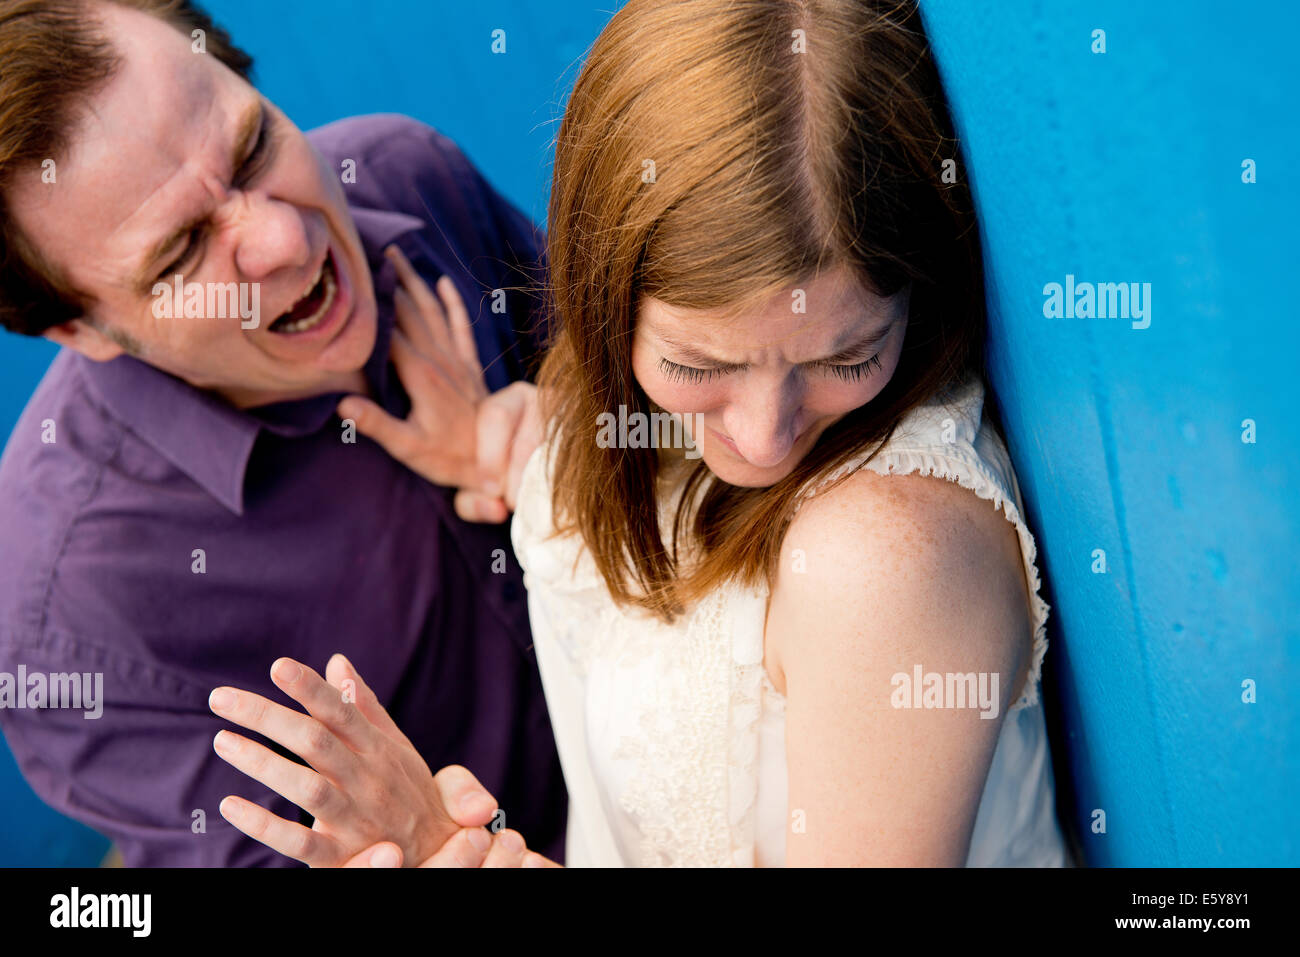 Aggressive man displaying violent behaviour and verbal abuse towards a helpless woman. Stock Photo